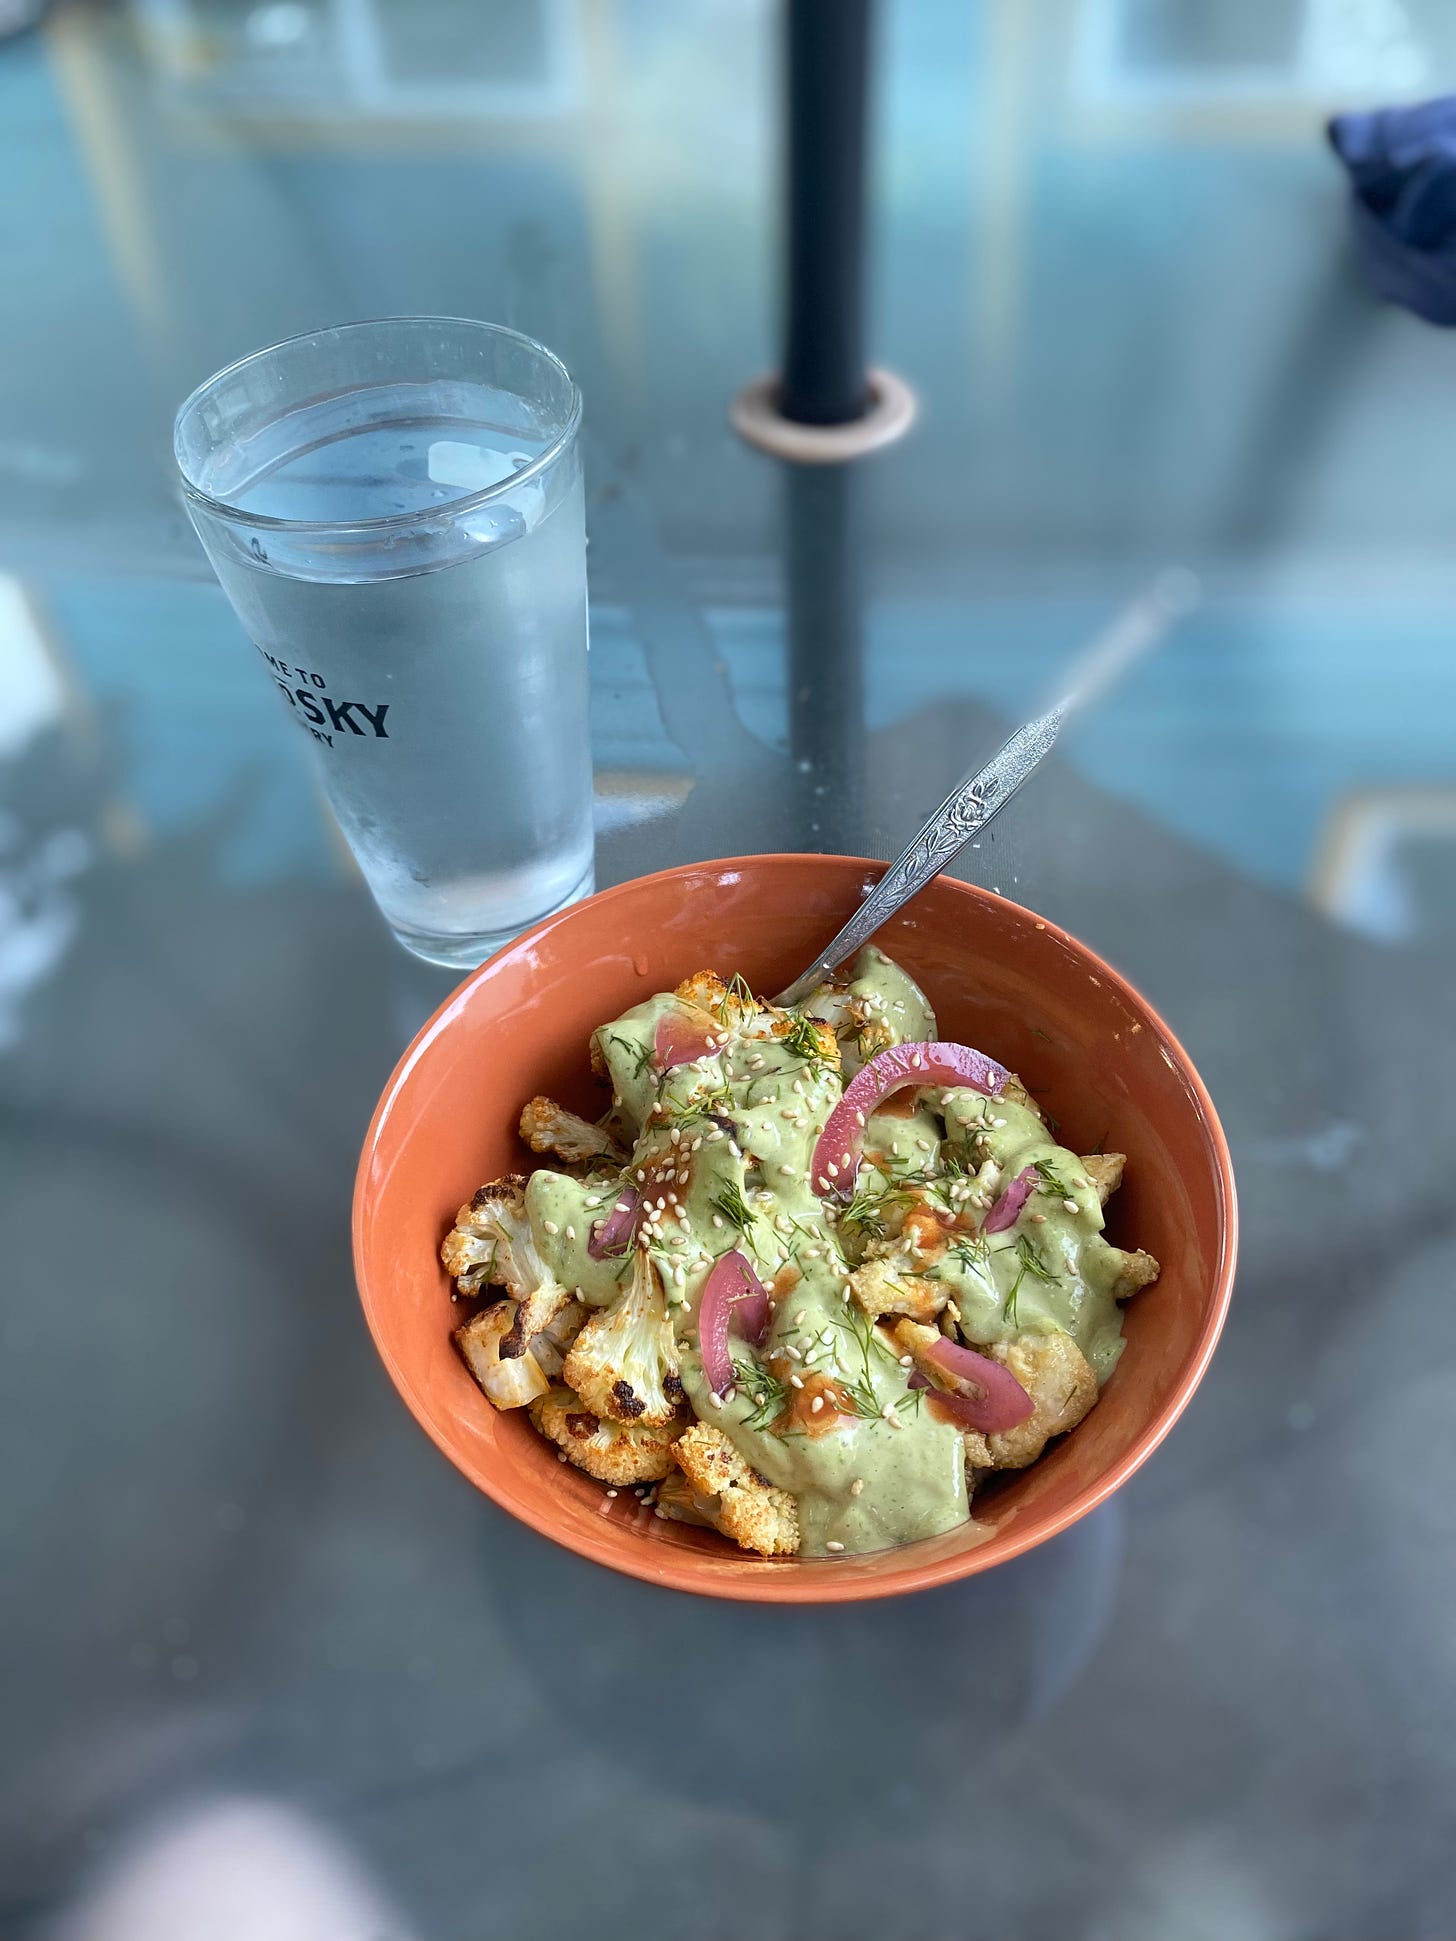 An orange bowl of quinoa, roasted, cauliflower, and tofu covered with green goddess dressing. On top are pickled red onion slices, sesame seeds, and dots of hot sauce. Next to the bowl is a pint glass of water with condensation on the outside.